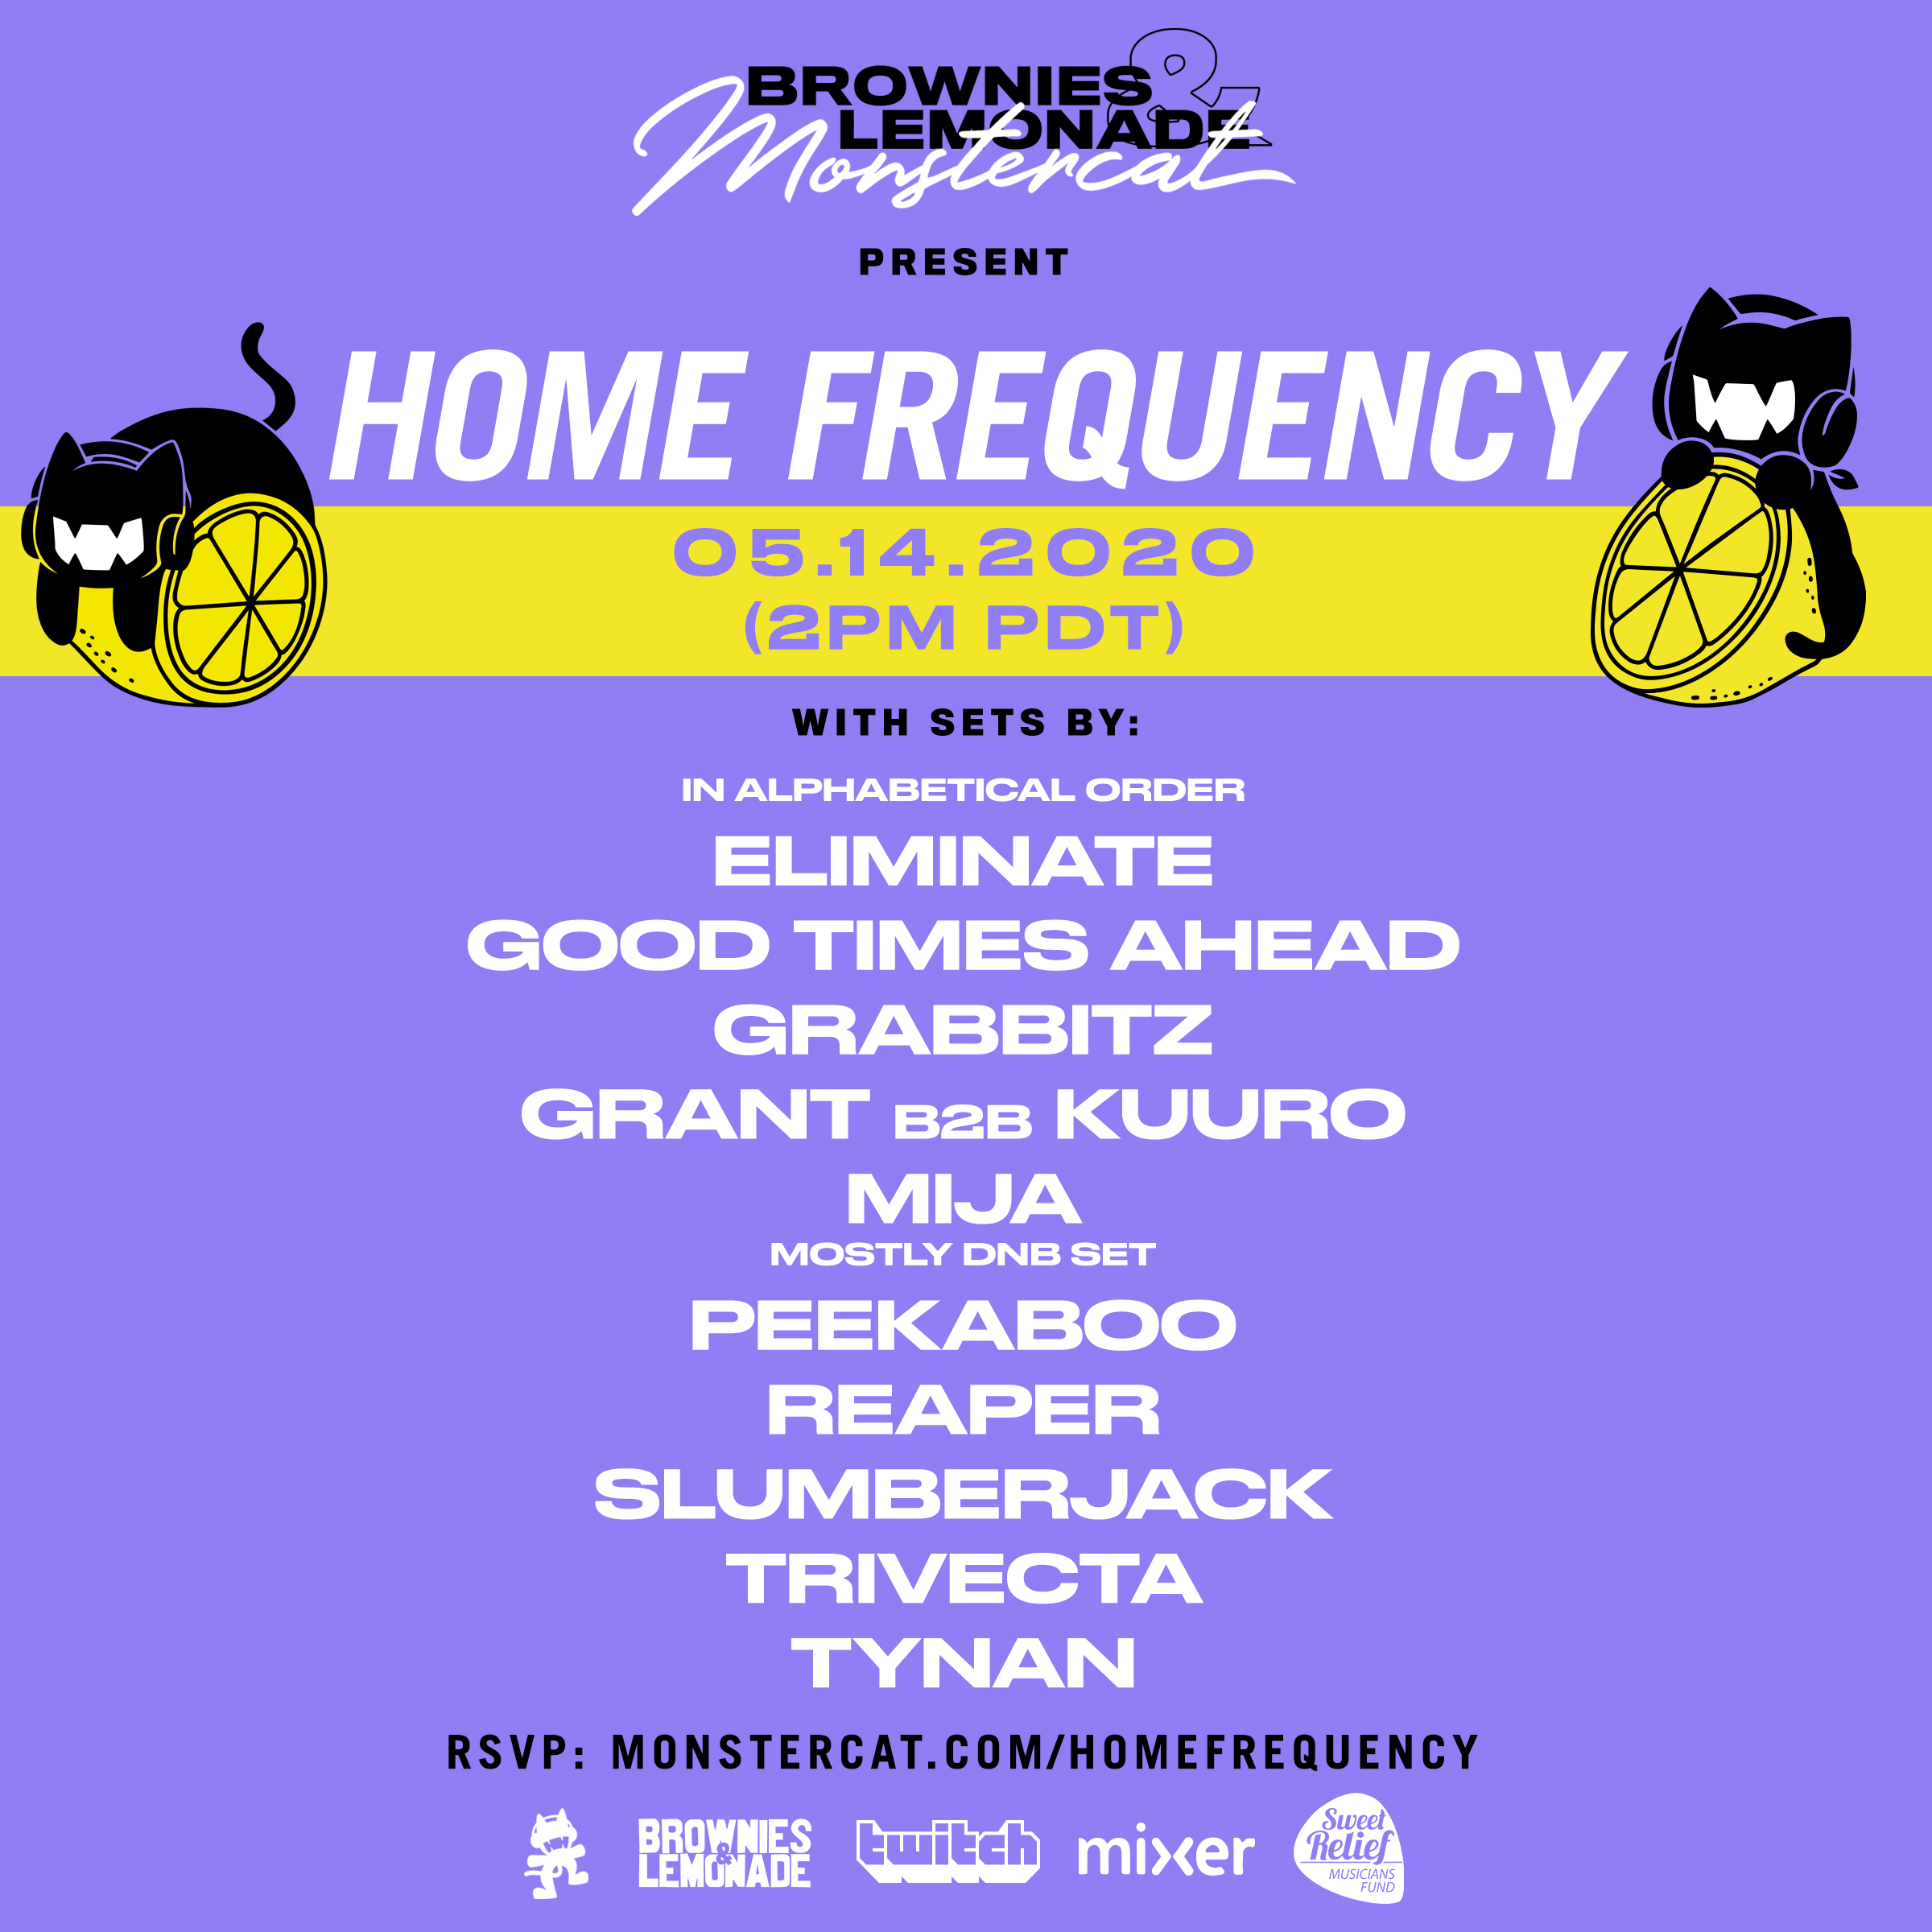 Brownies & Lemonade and Monstercat Present: Home Frequency Lineup